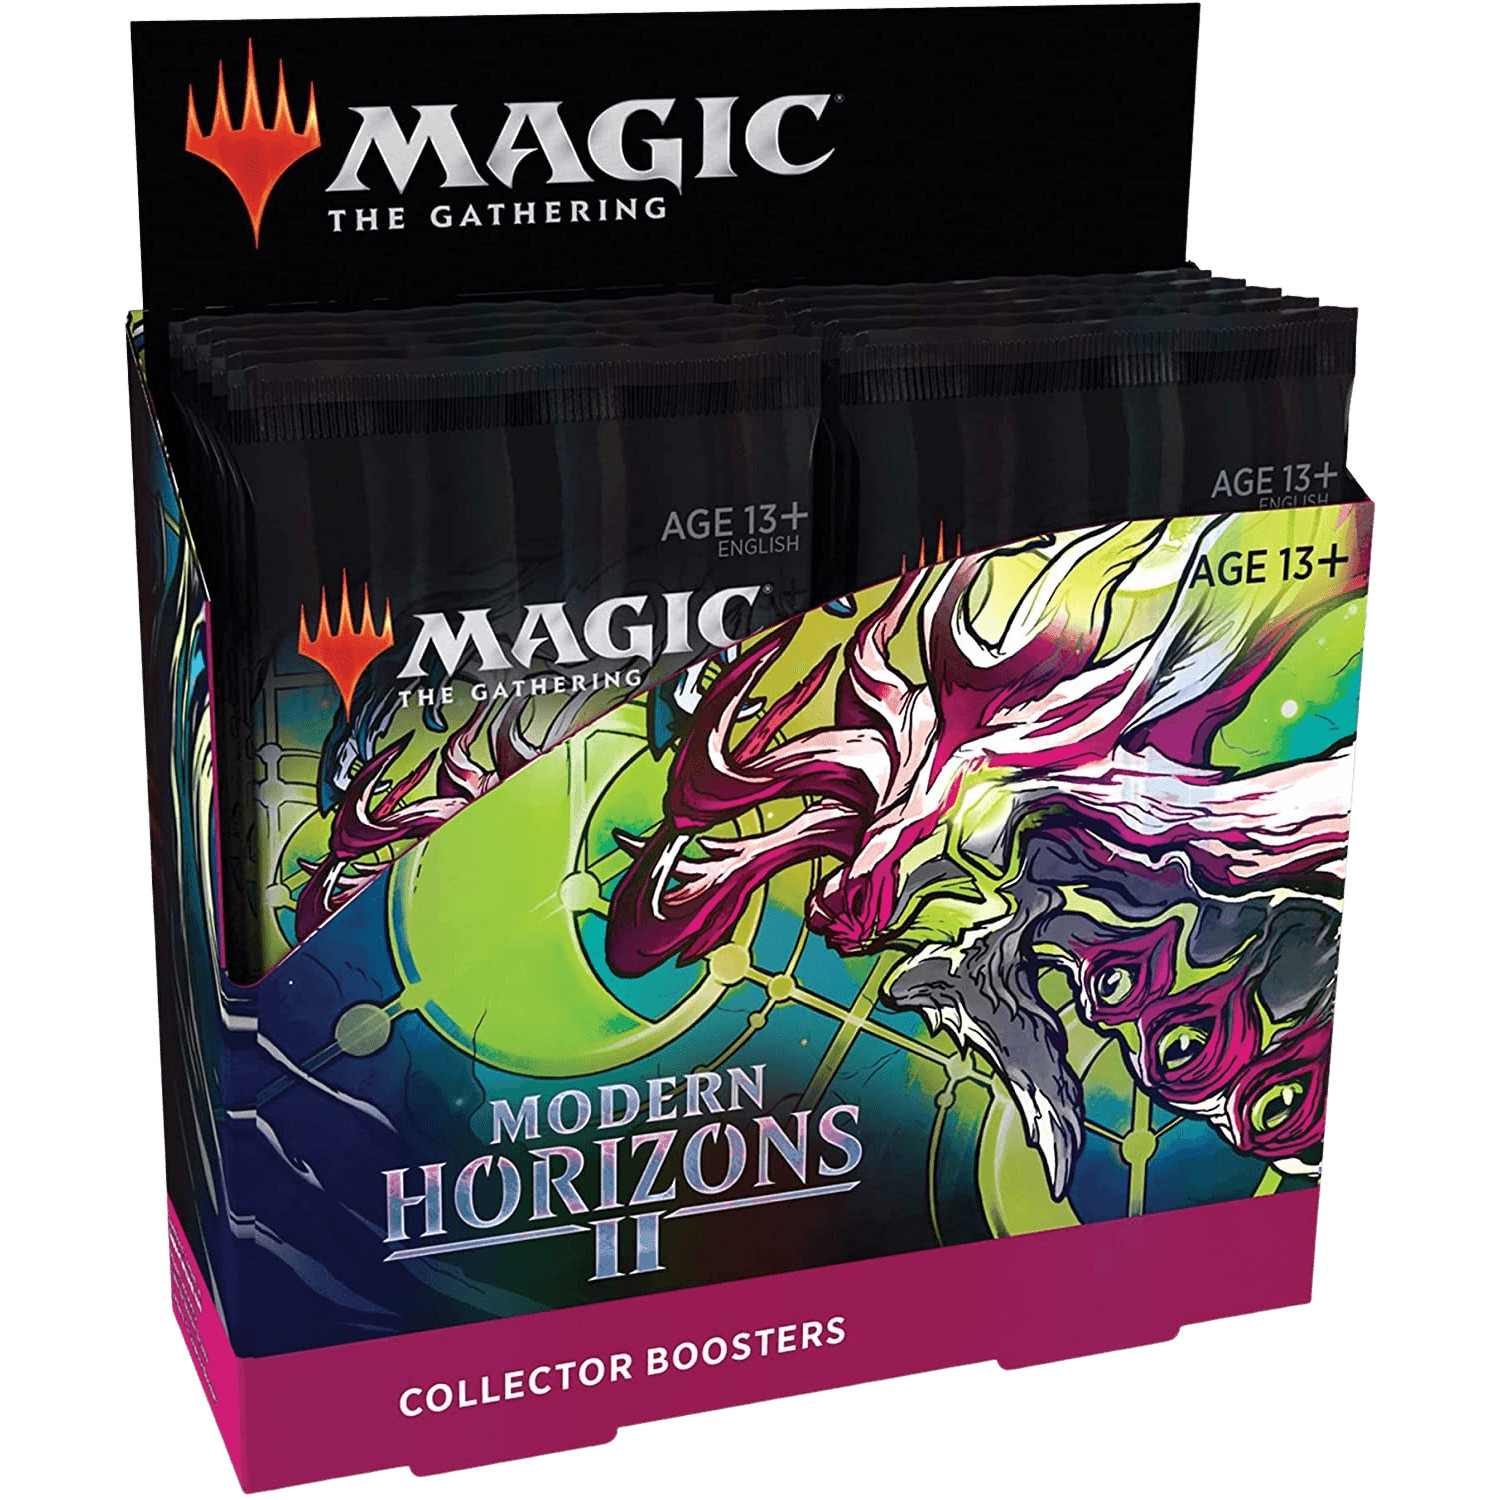 Magic: The Gathering - Modern Horizons 2 Collector Booster Box - The Card Vault